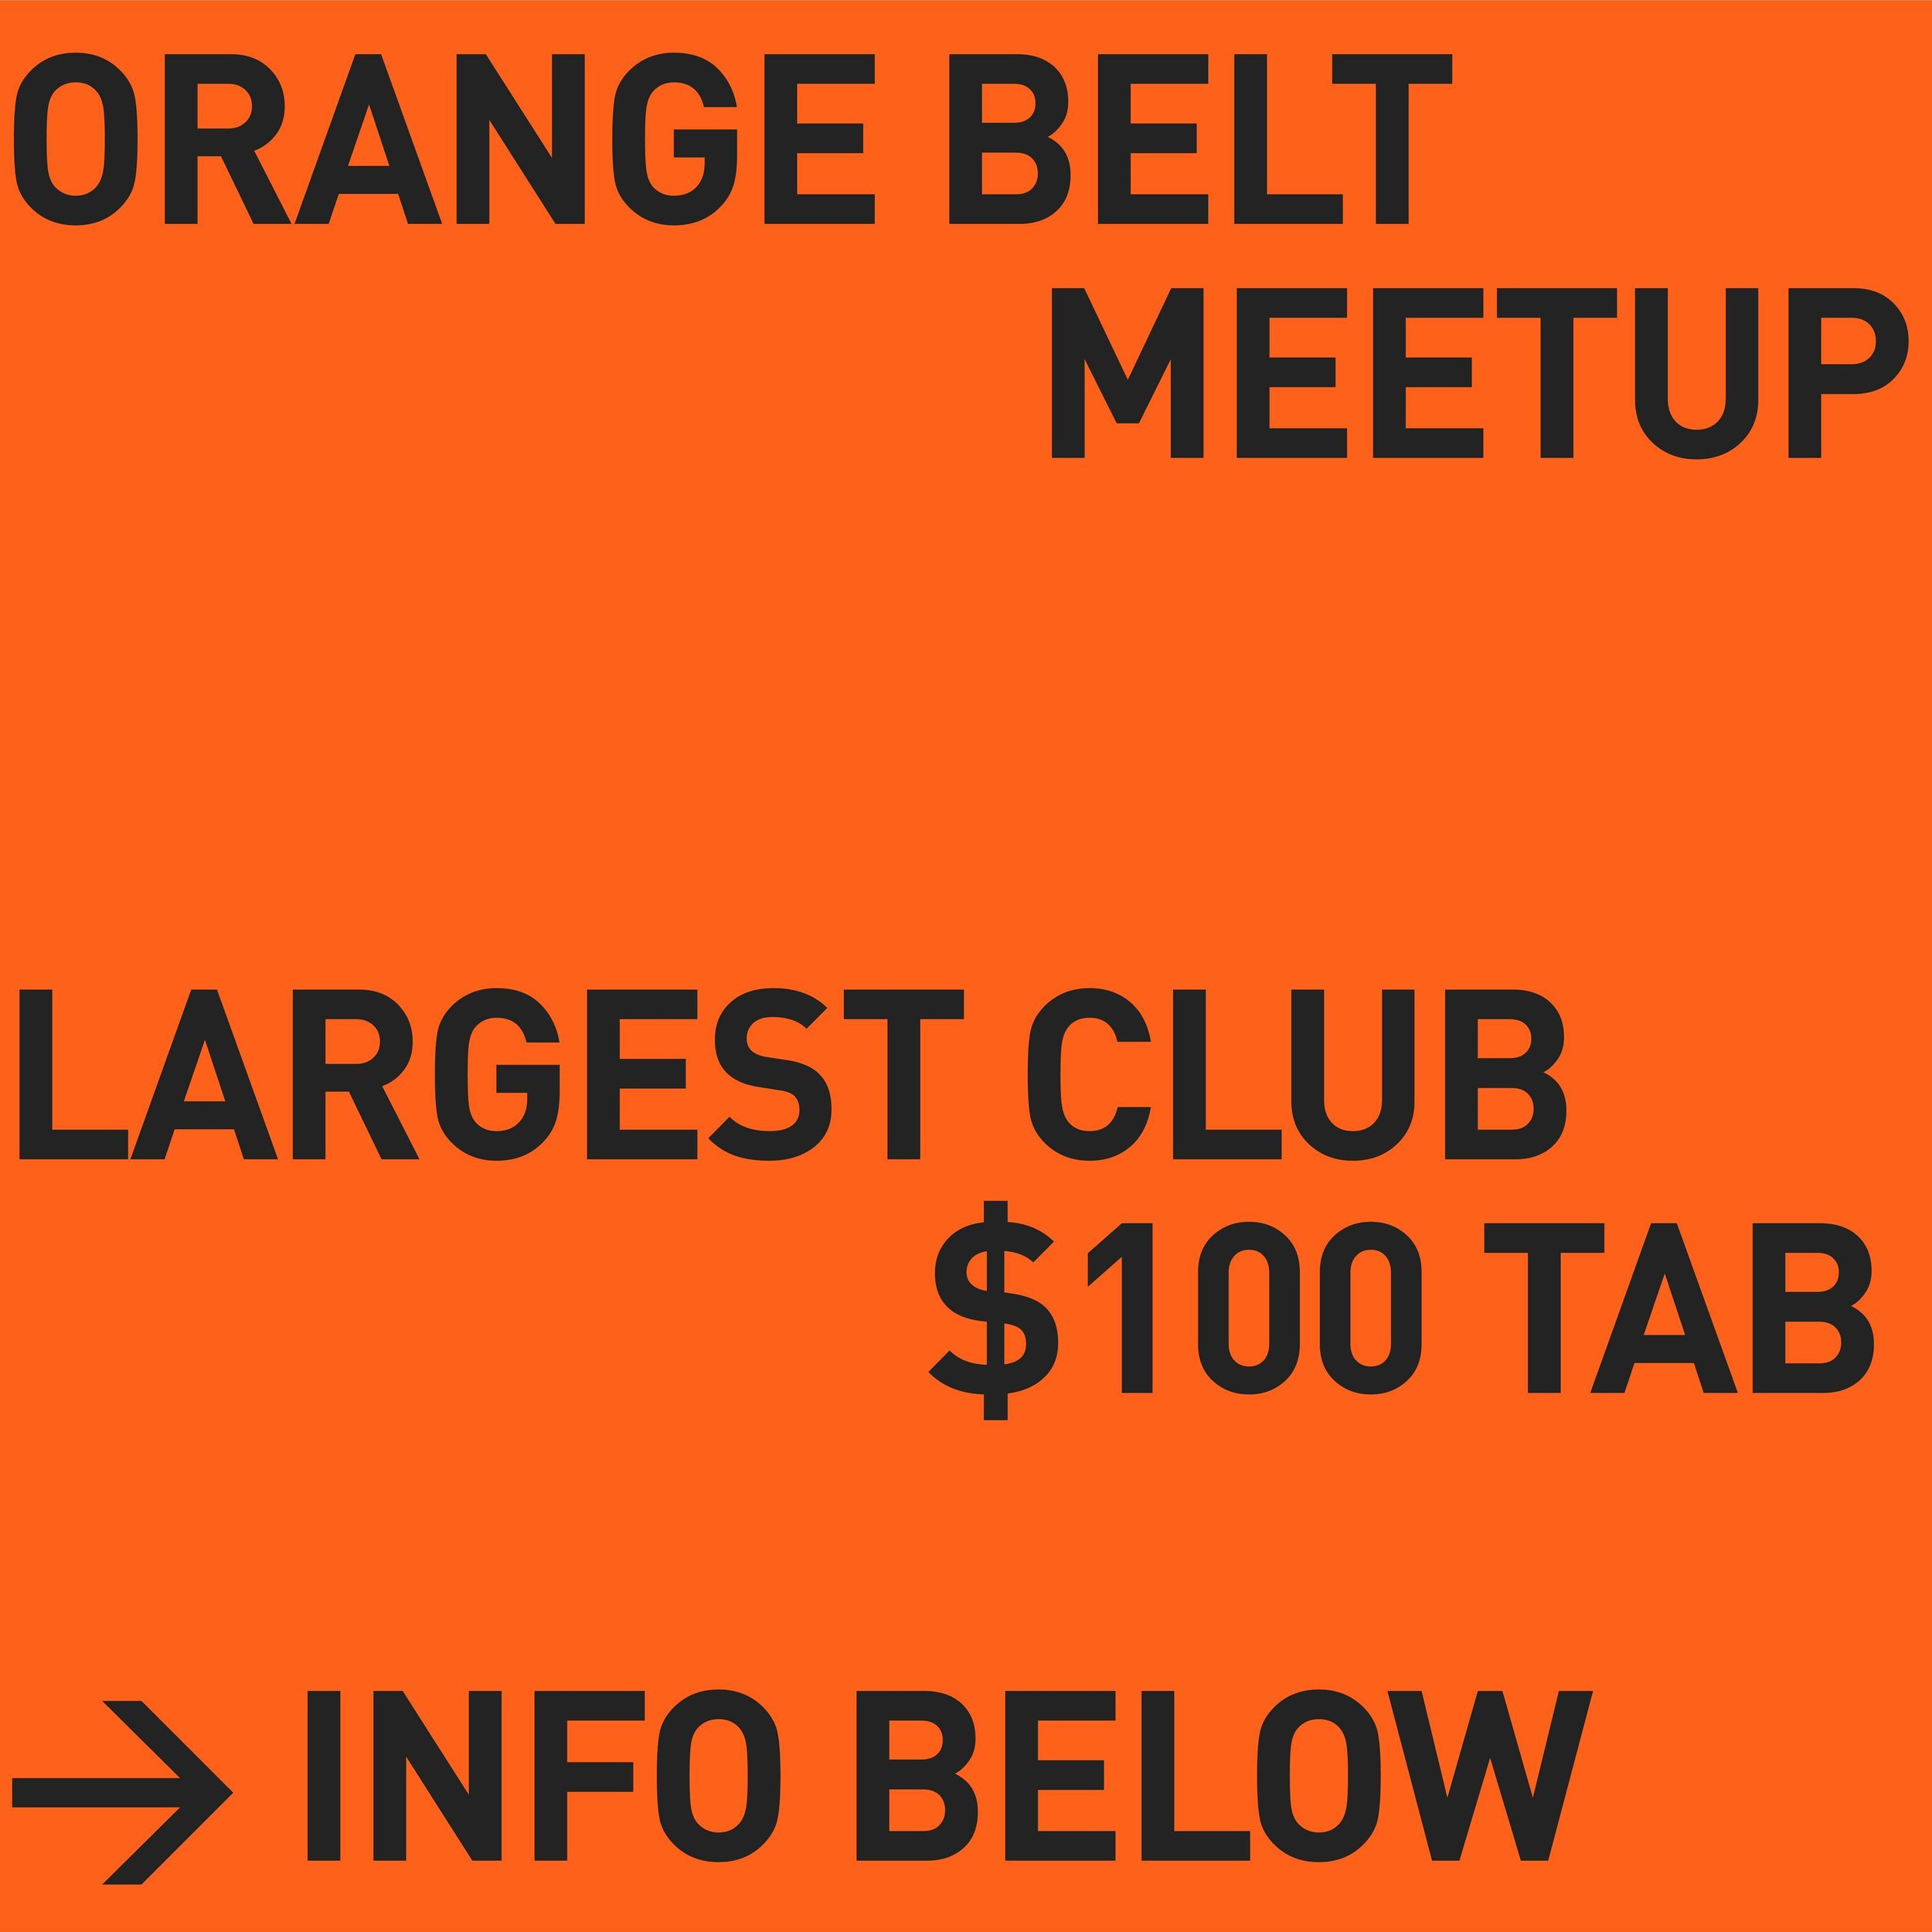 Largest Club: We&rsquo;ll do a headcount at noon, and the club or group with the most attendees wins! While it would be great to see club jerseys, we understand that not all clubs or groups have them.